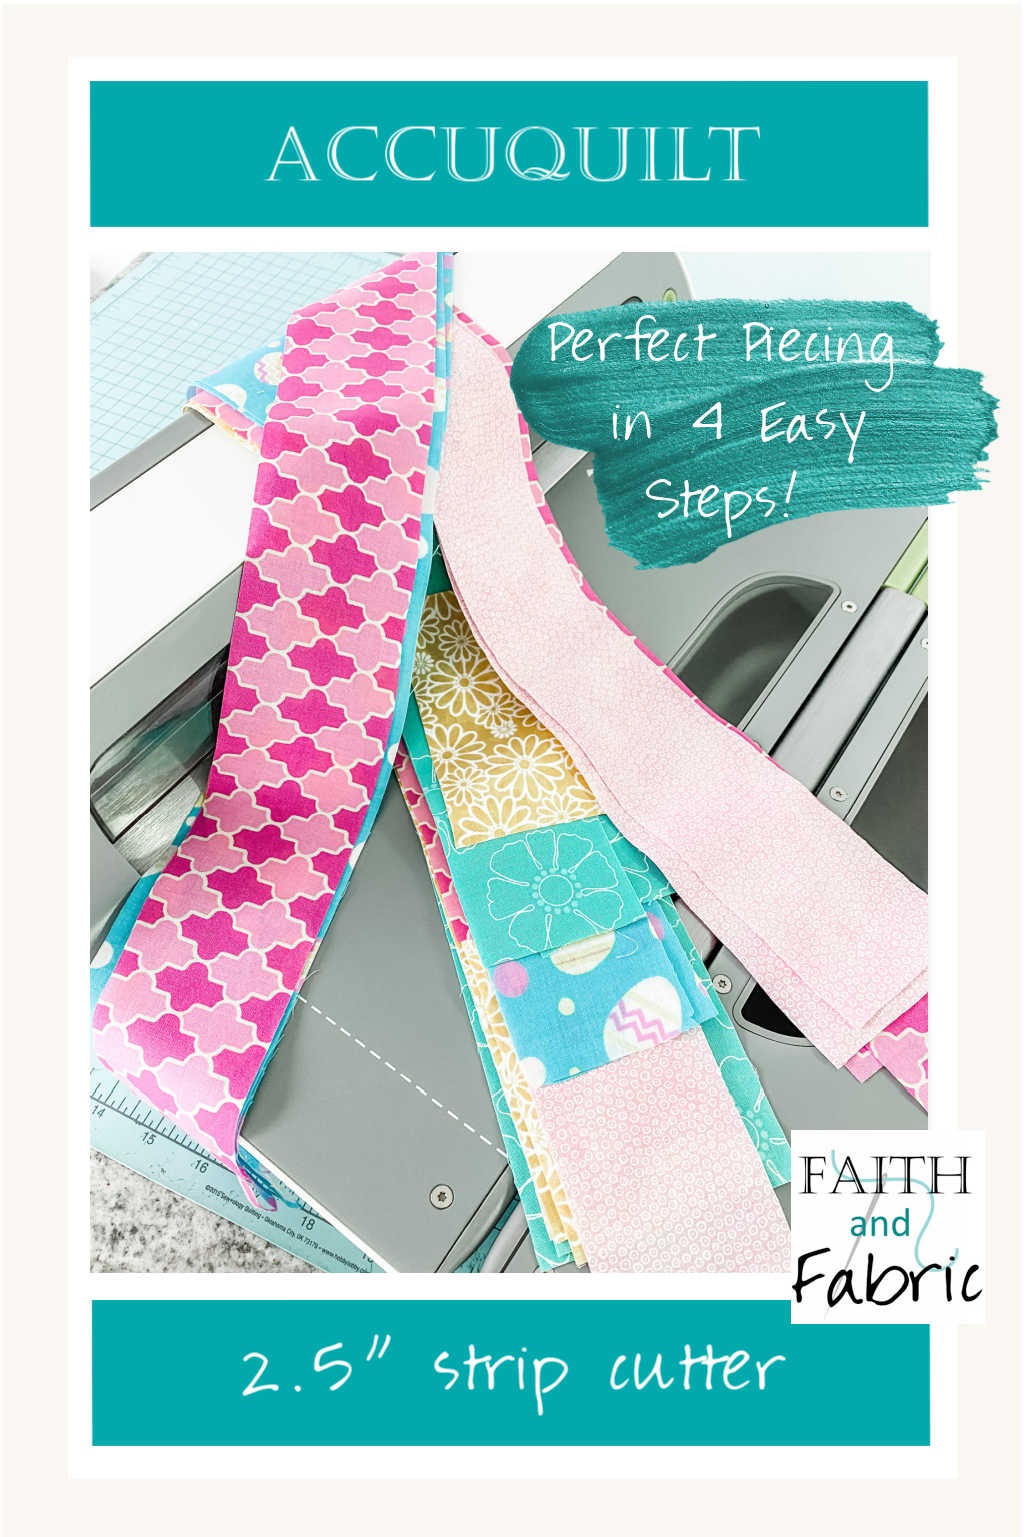 How to use the Accuquilt Go Big for Strip Binding – Faith and Fabric